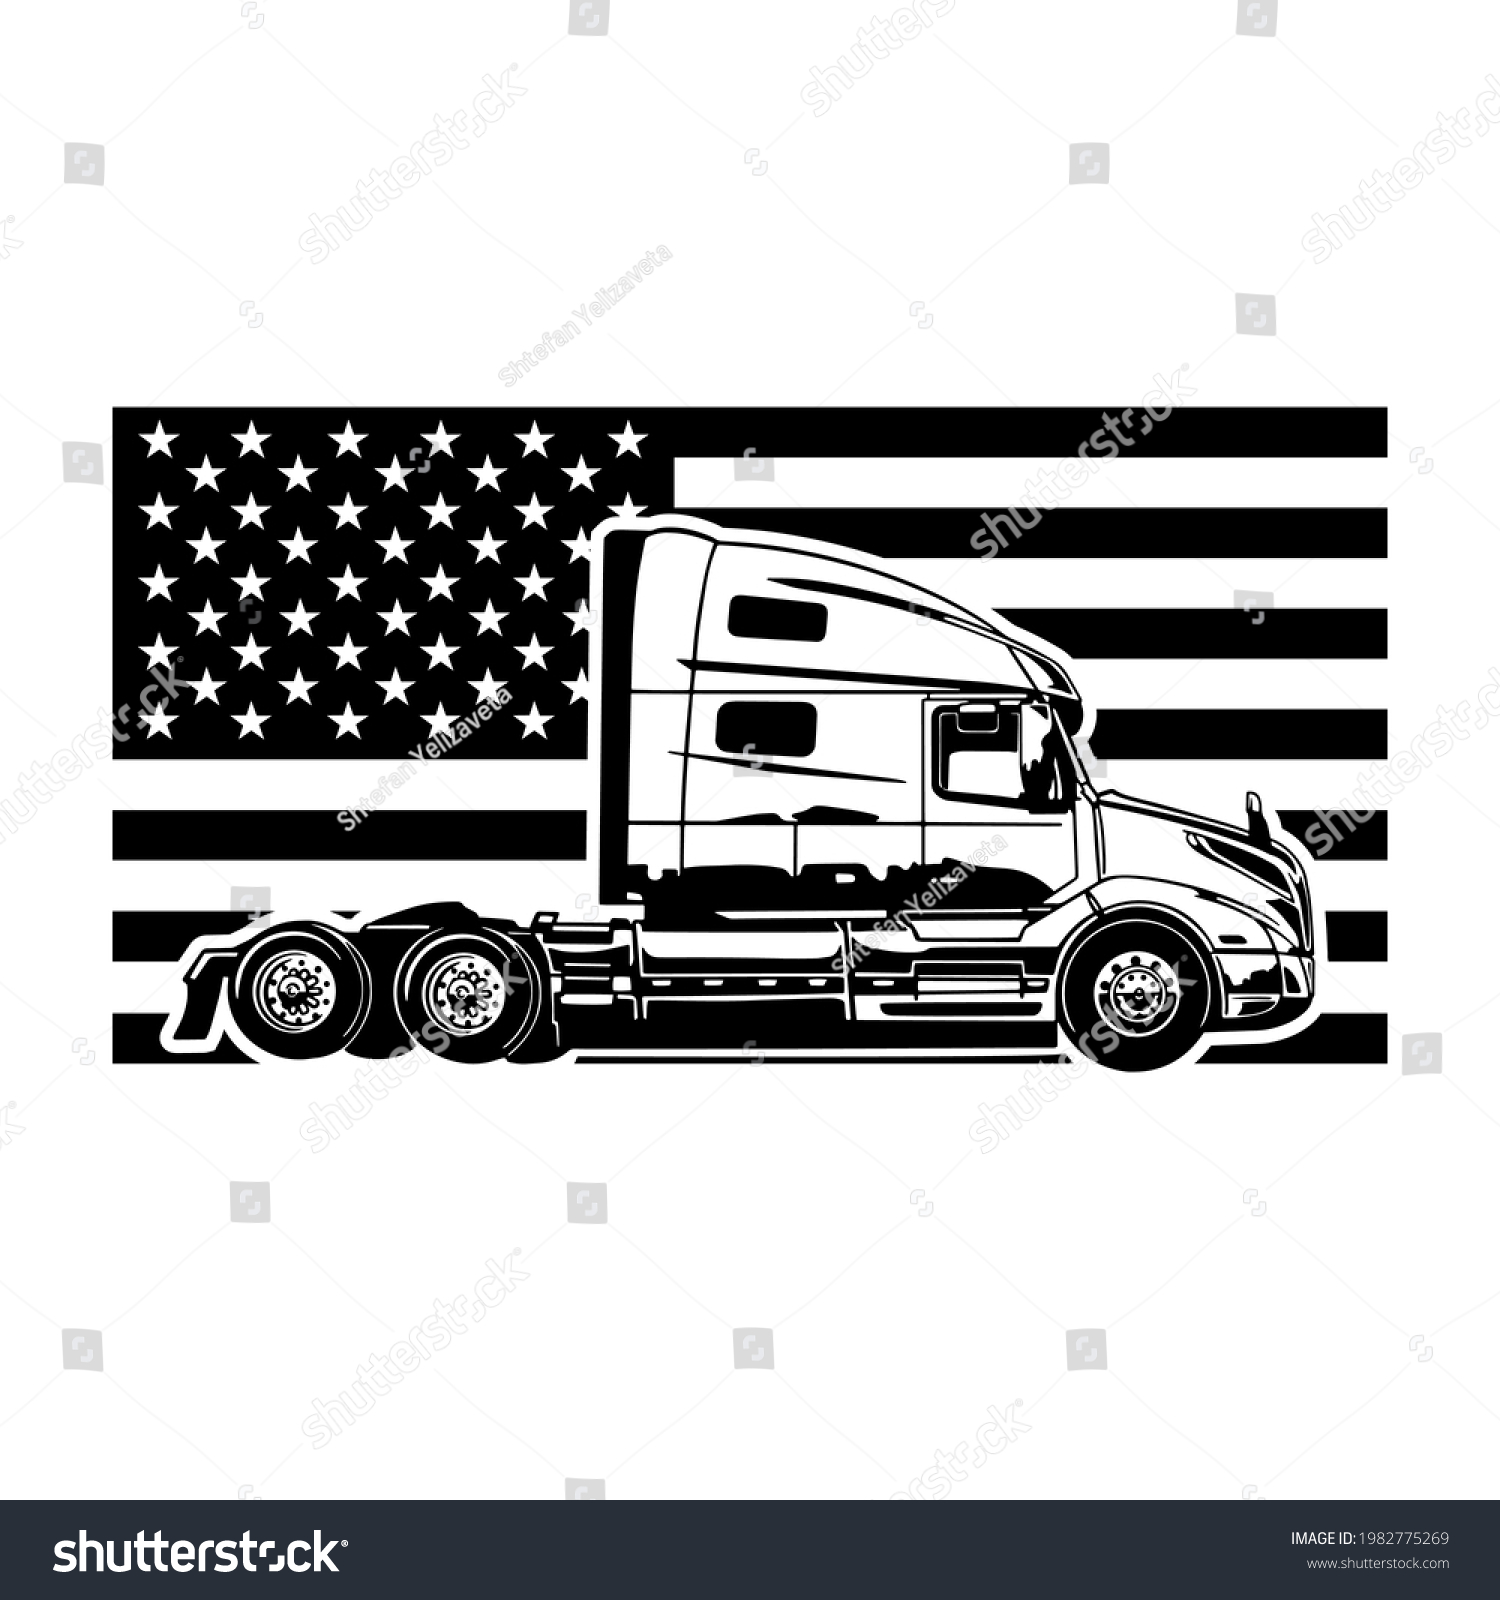 SVG of American semi-truck on the background of the American flag. Vector illustration for printing and cutting svg